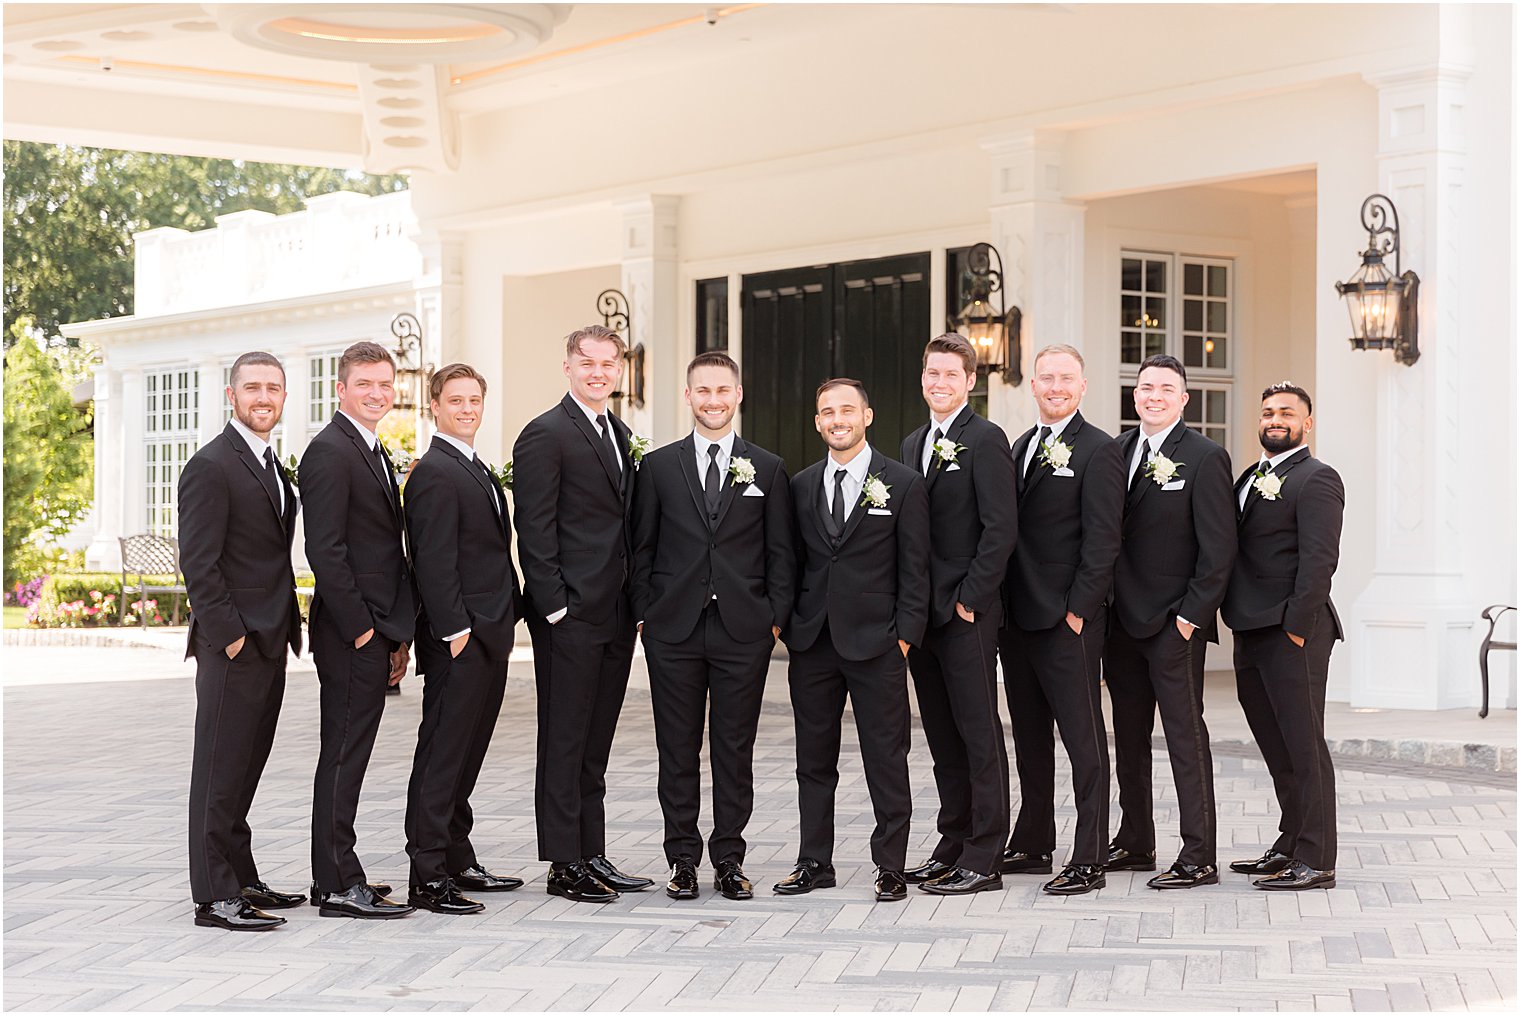 groom and groomsmen stand together in classic tuxes